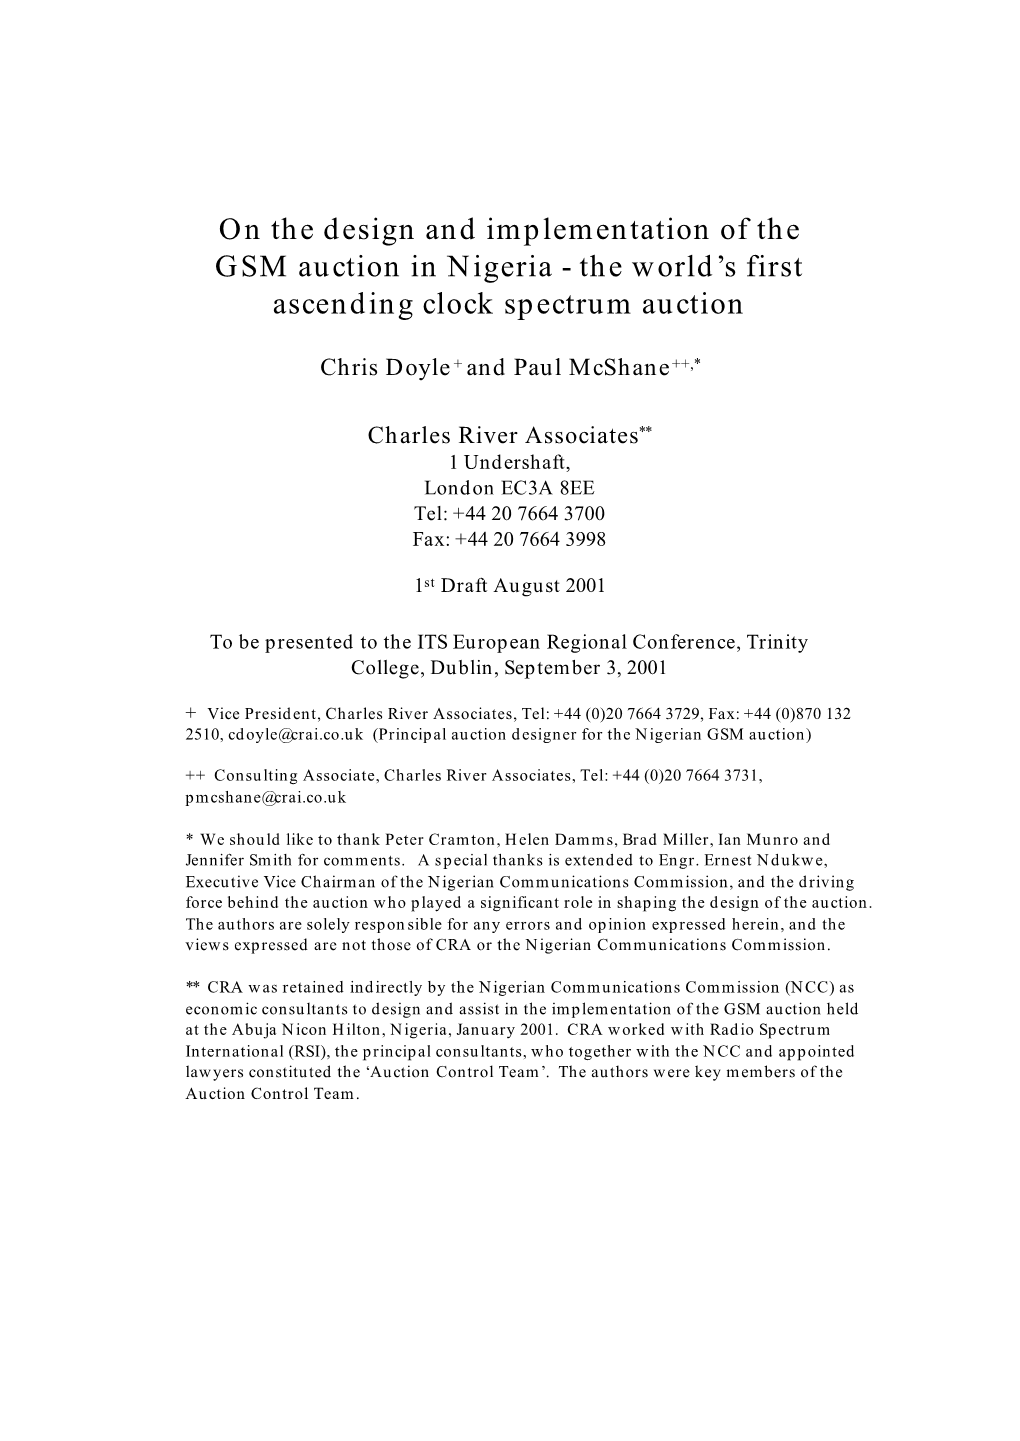 On the Design and Implementation of the GSM Auction in Nigeria - the World’S First Ascending Clock Spectrum Auction